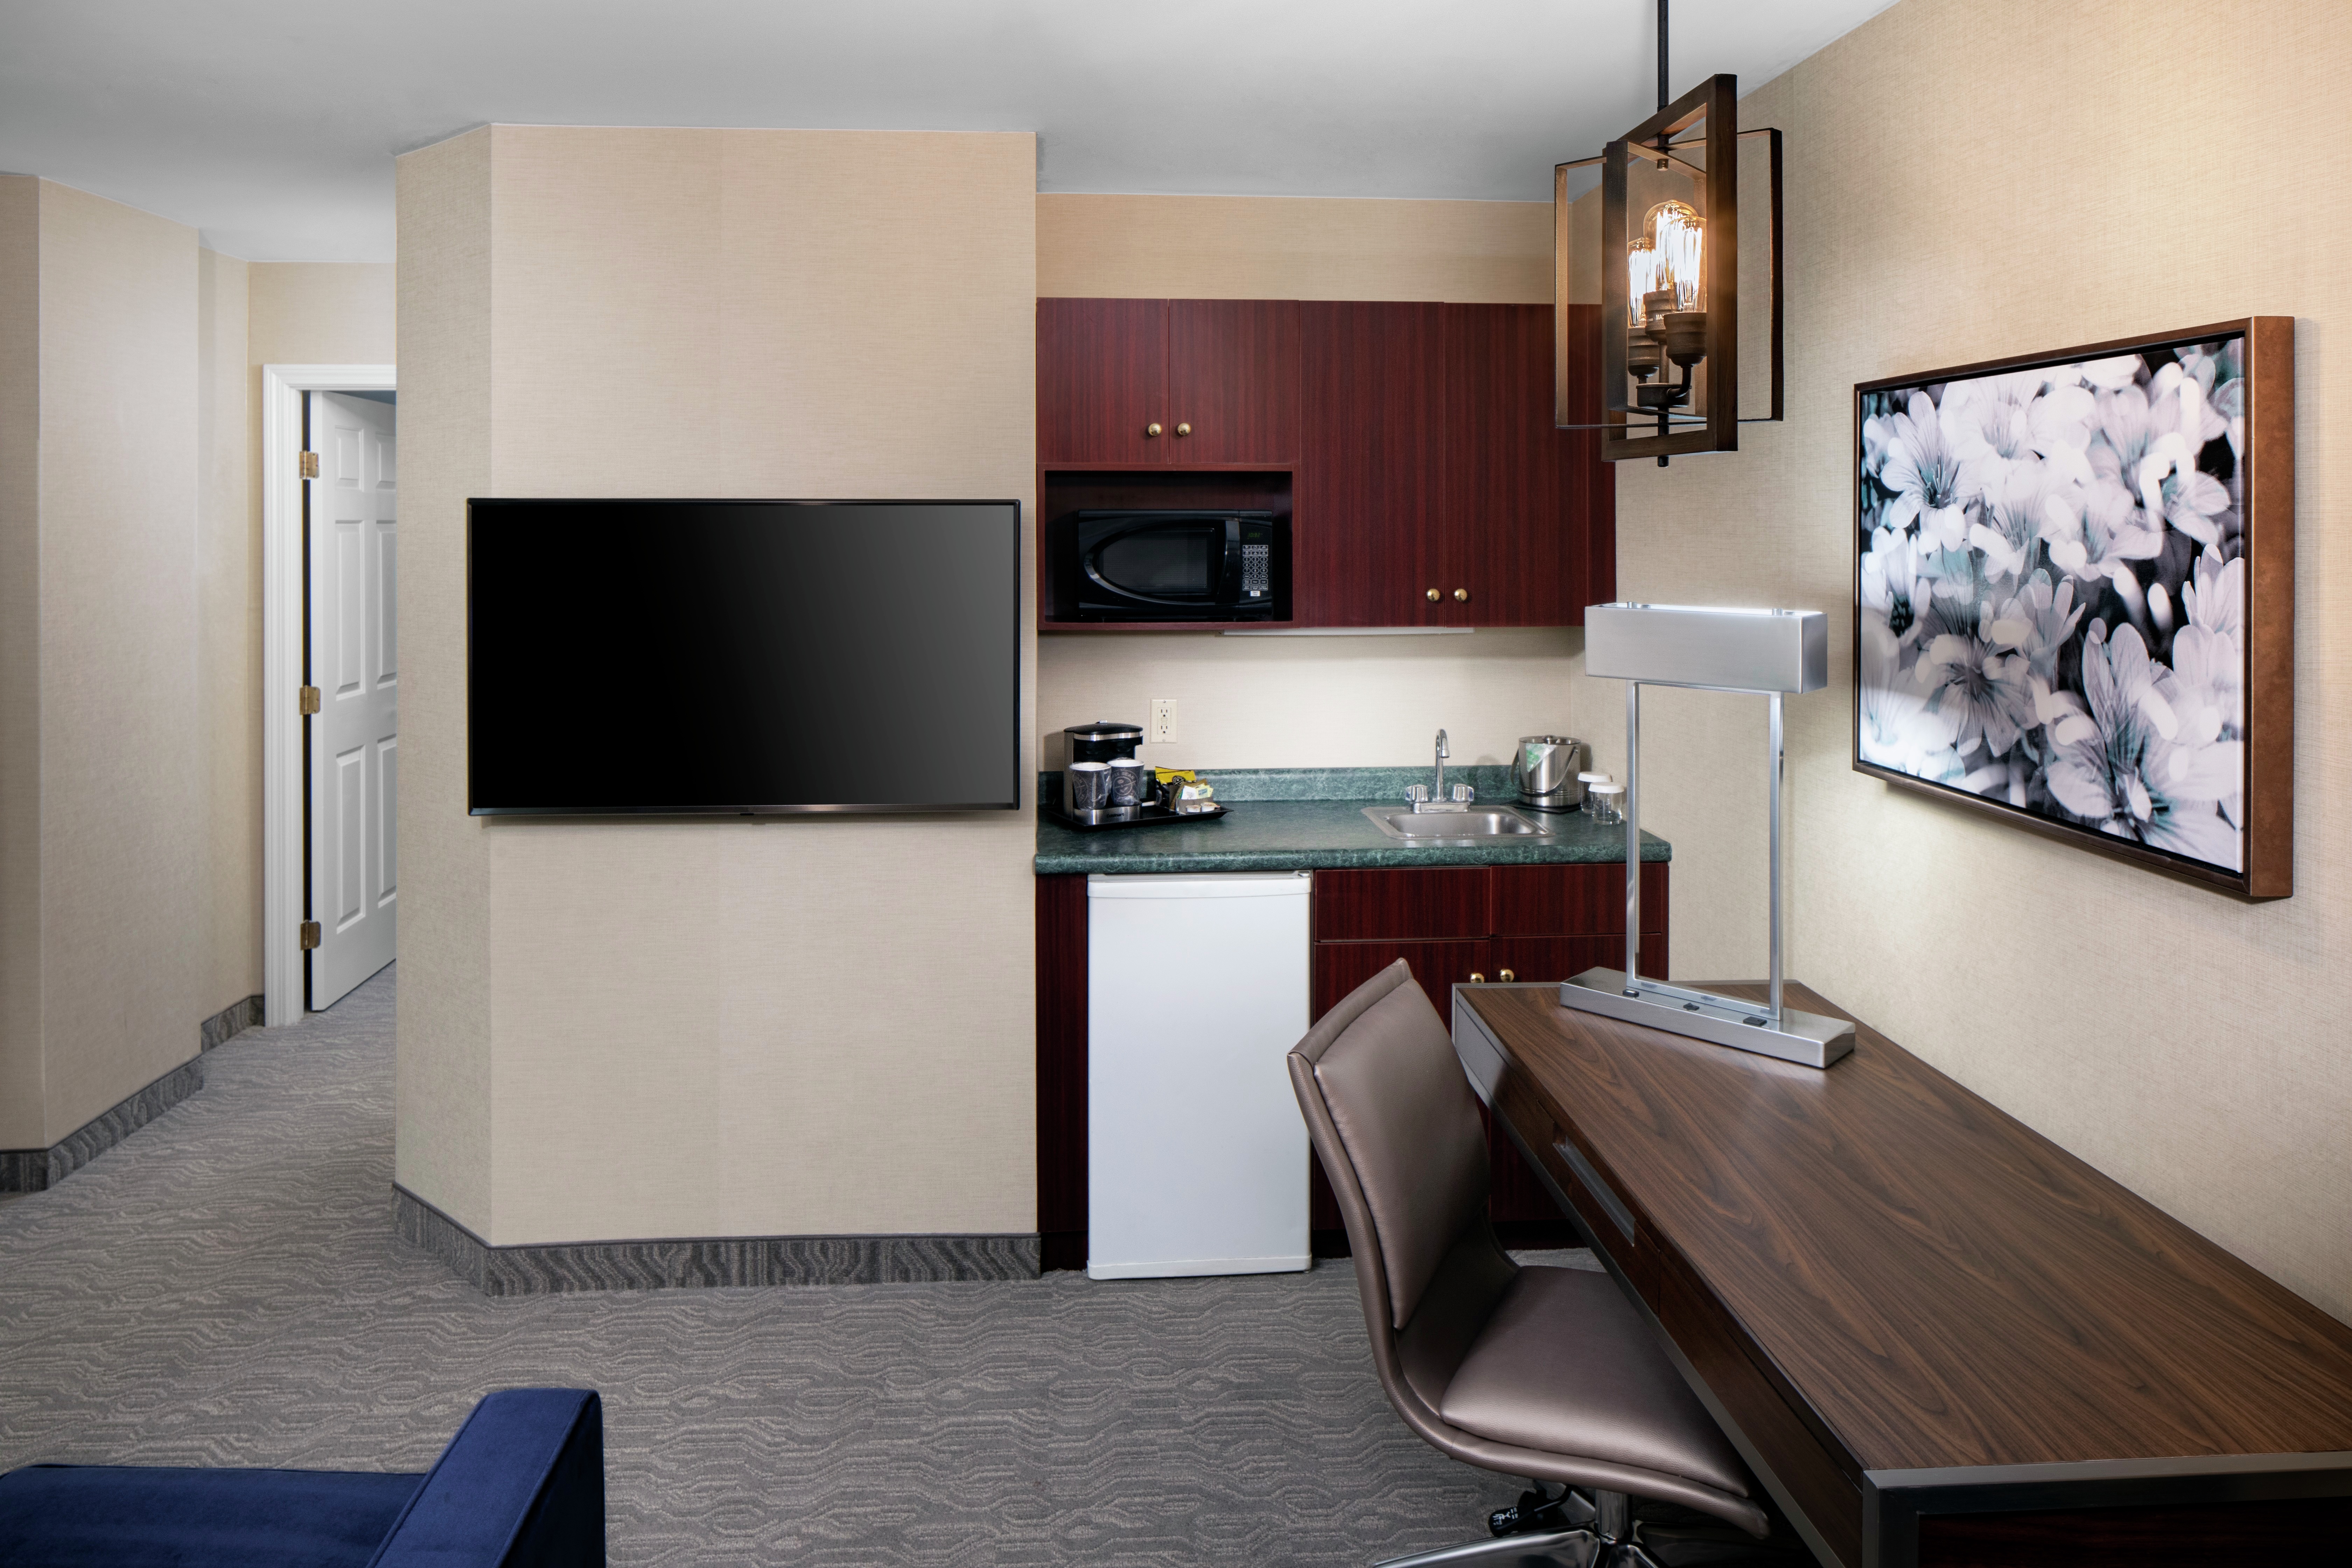 Suite Living Area with Kitchenette and Flat Screen TV